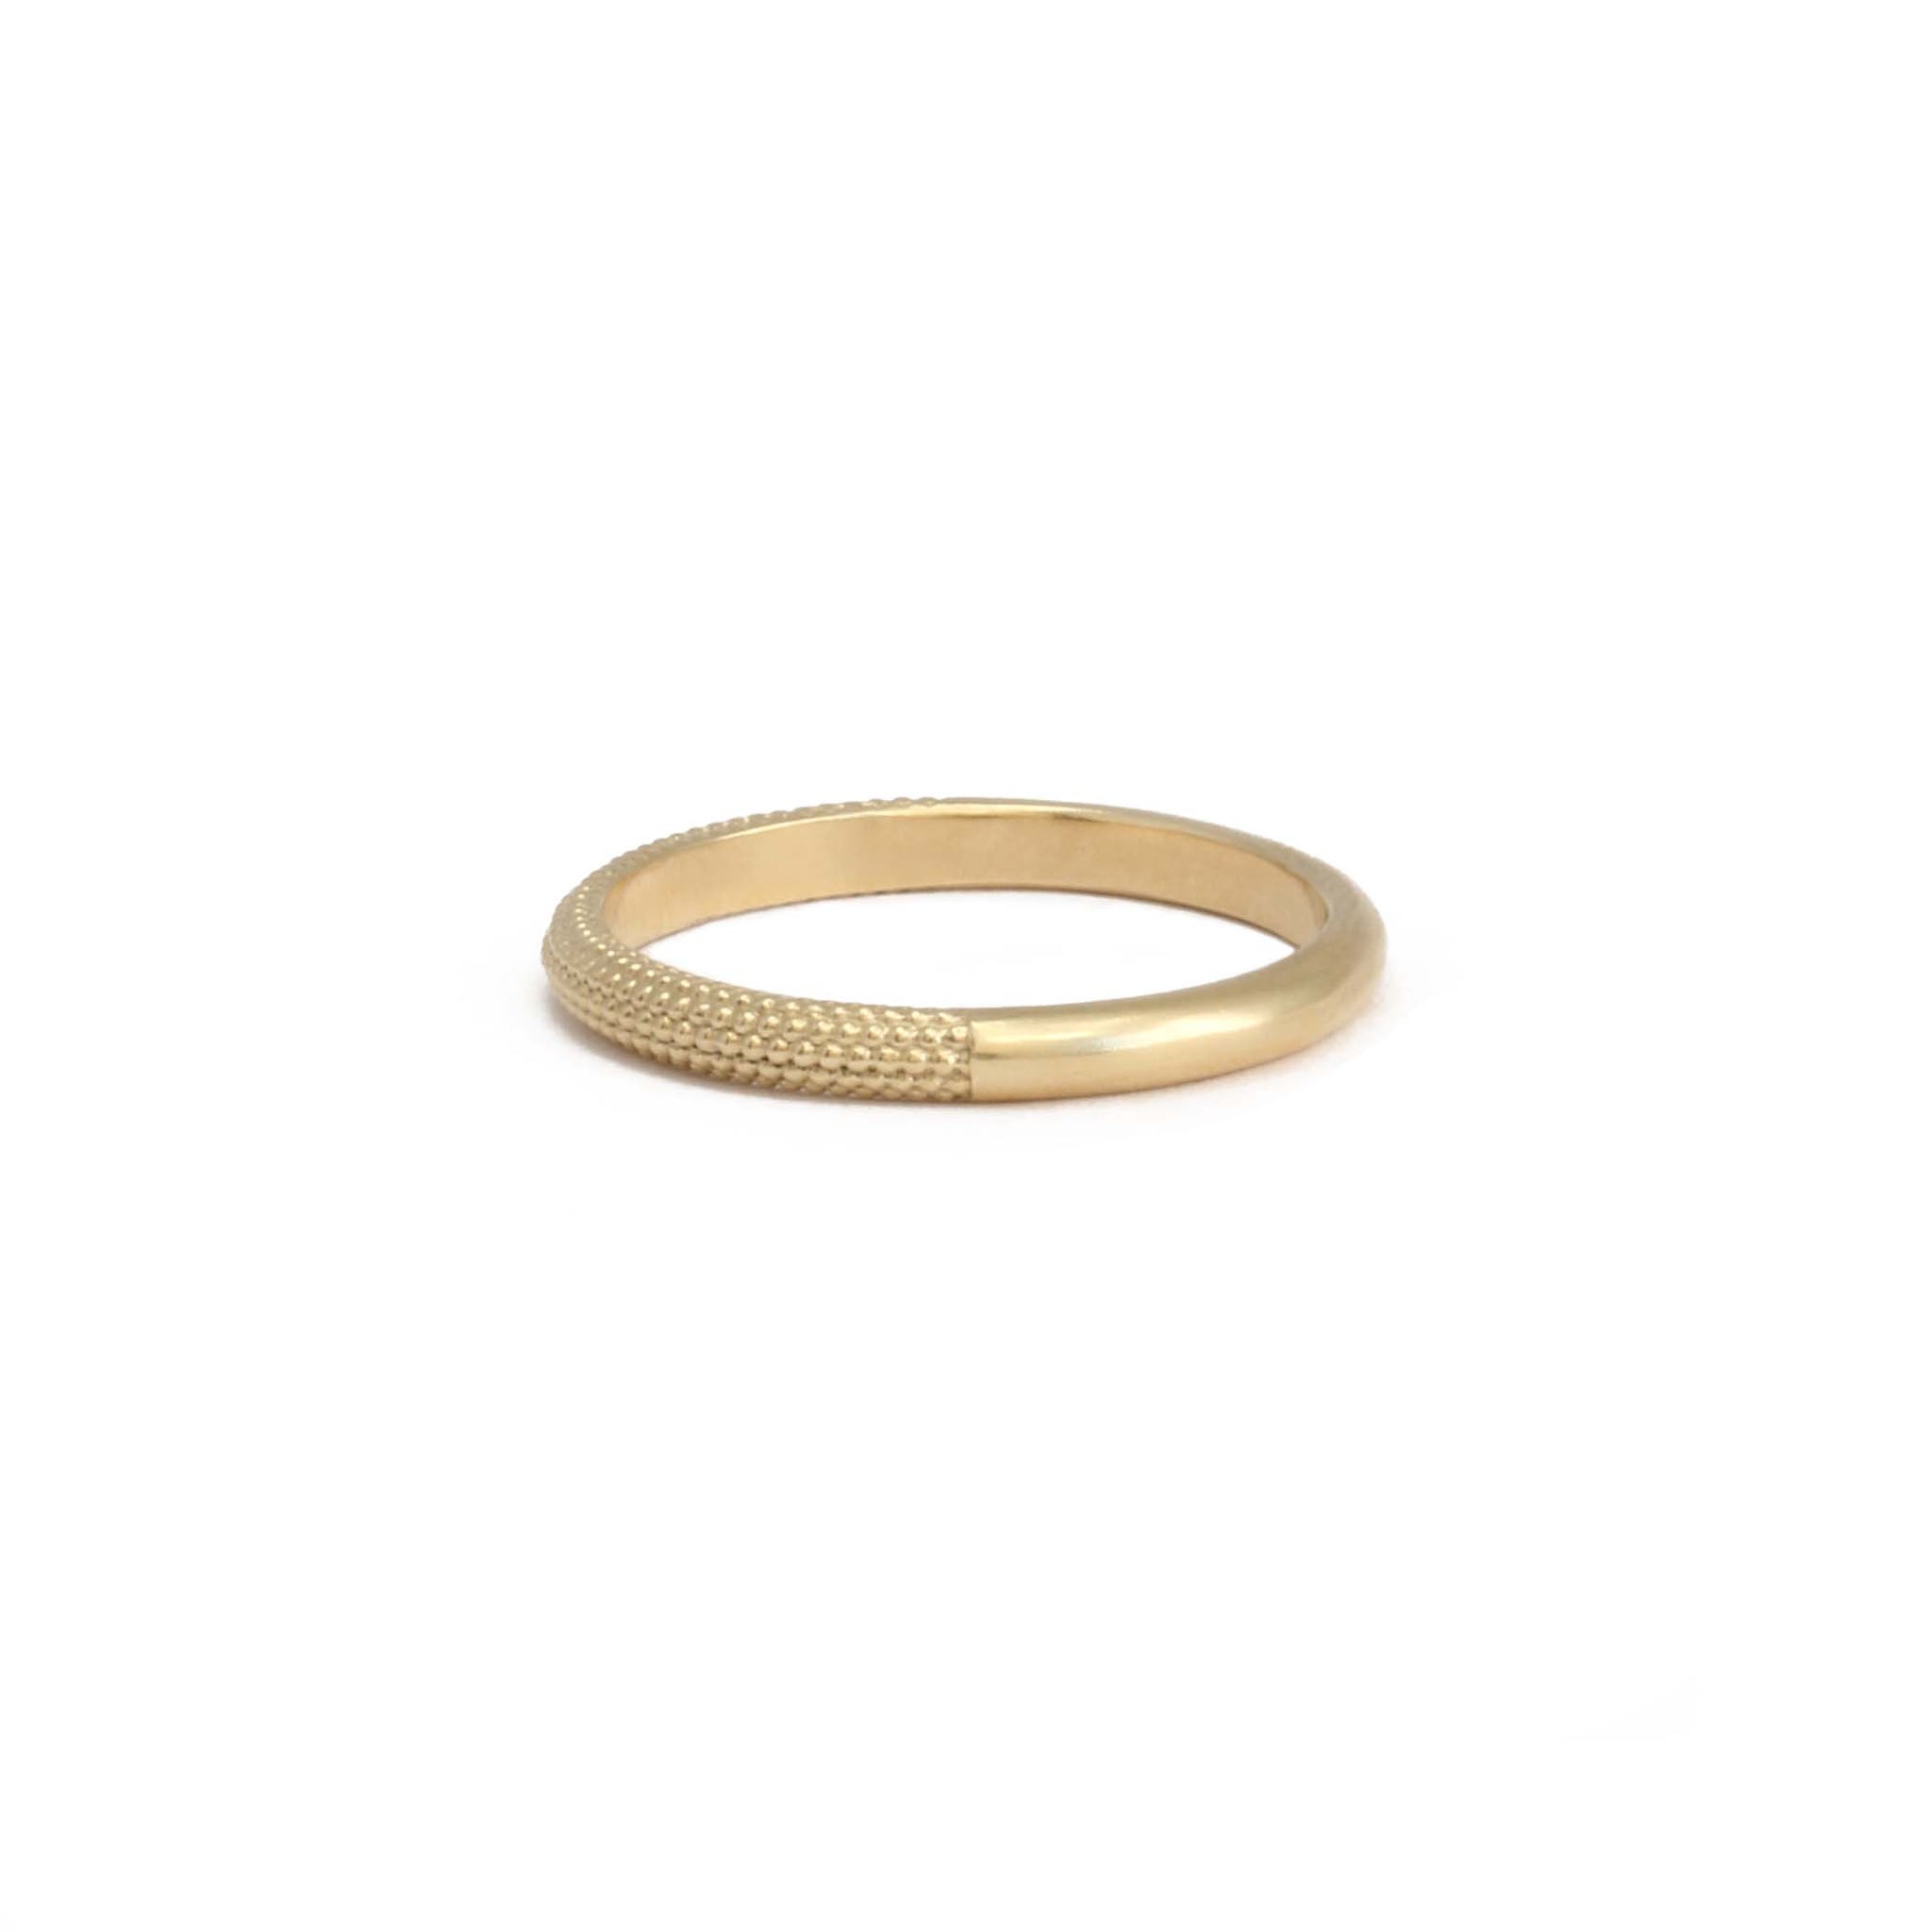 A ring with 2 faces, rough and smooth 9ct gold ring